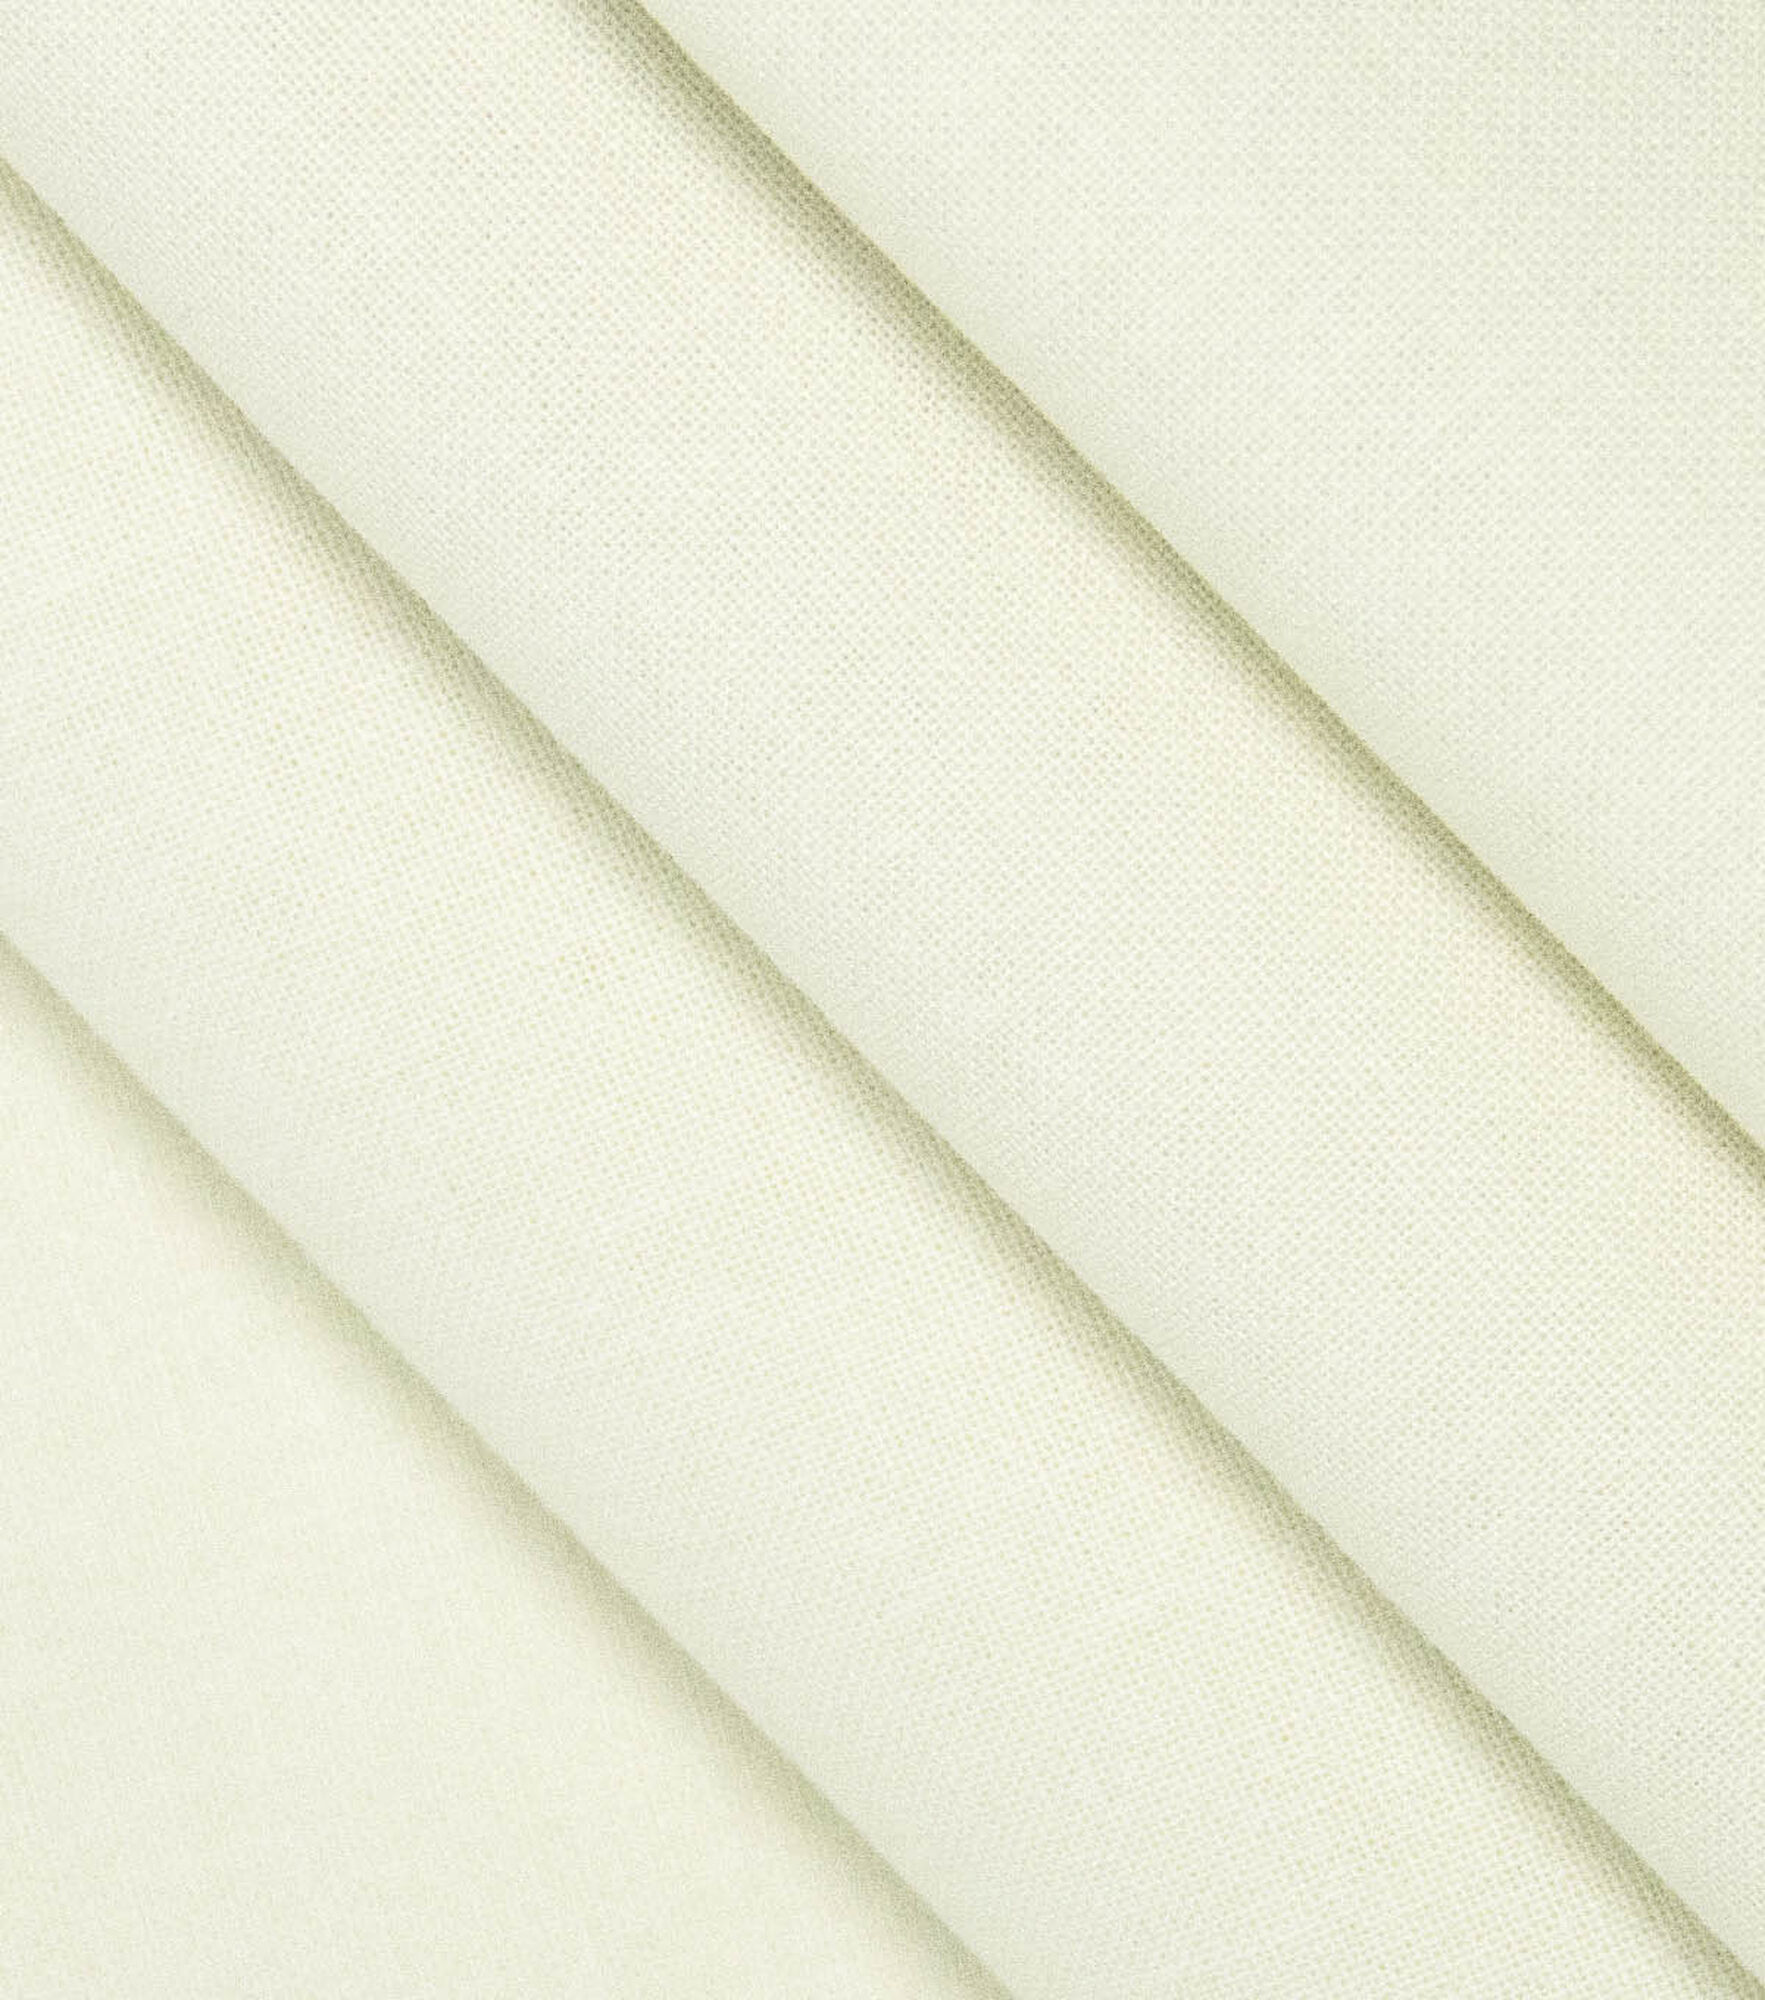 Sew Classic Solid Cotton Fabric